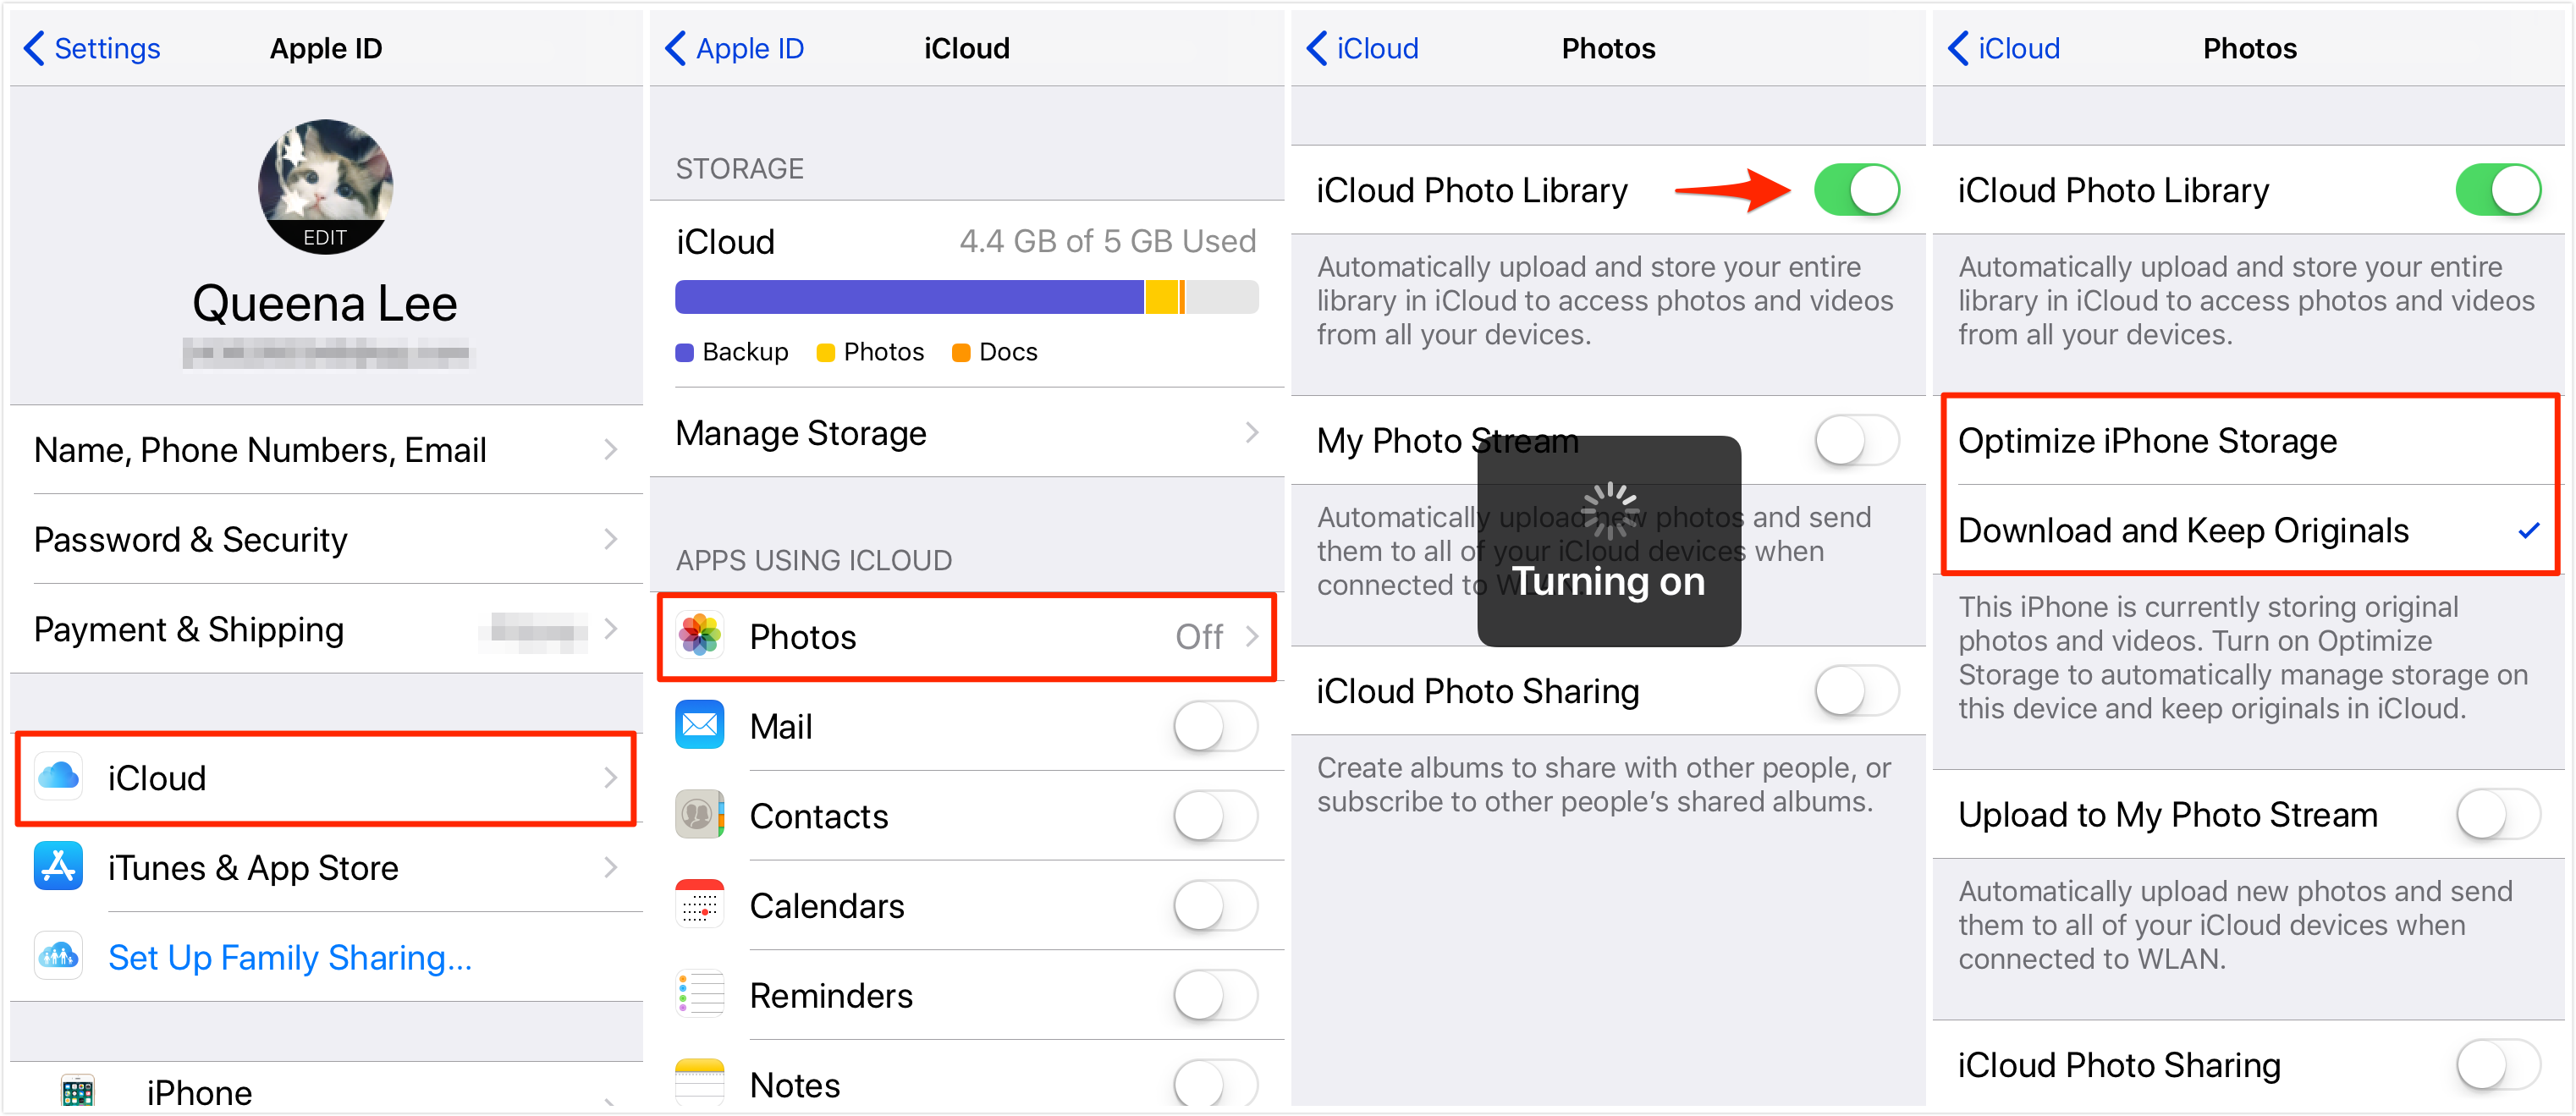 How to Transfer Photos from iPhone to New iPhone 11? 5 Ways